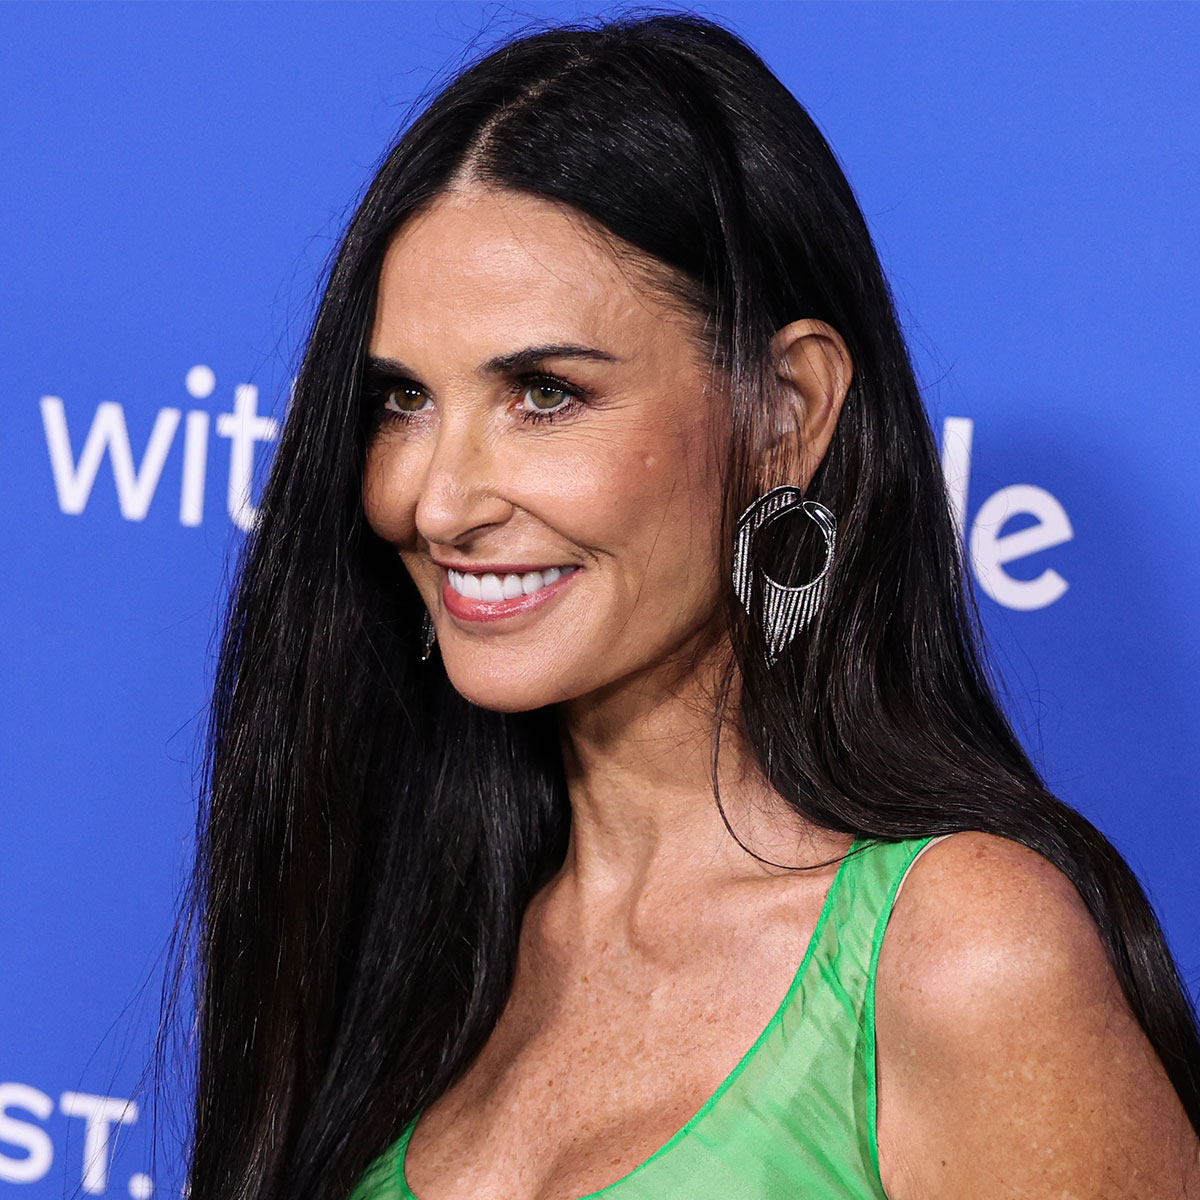 Demi Moore adds her style stamp, becomes face of new Ann Taylor ads